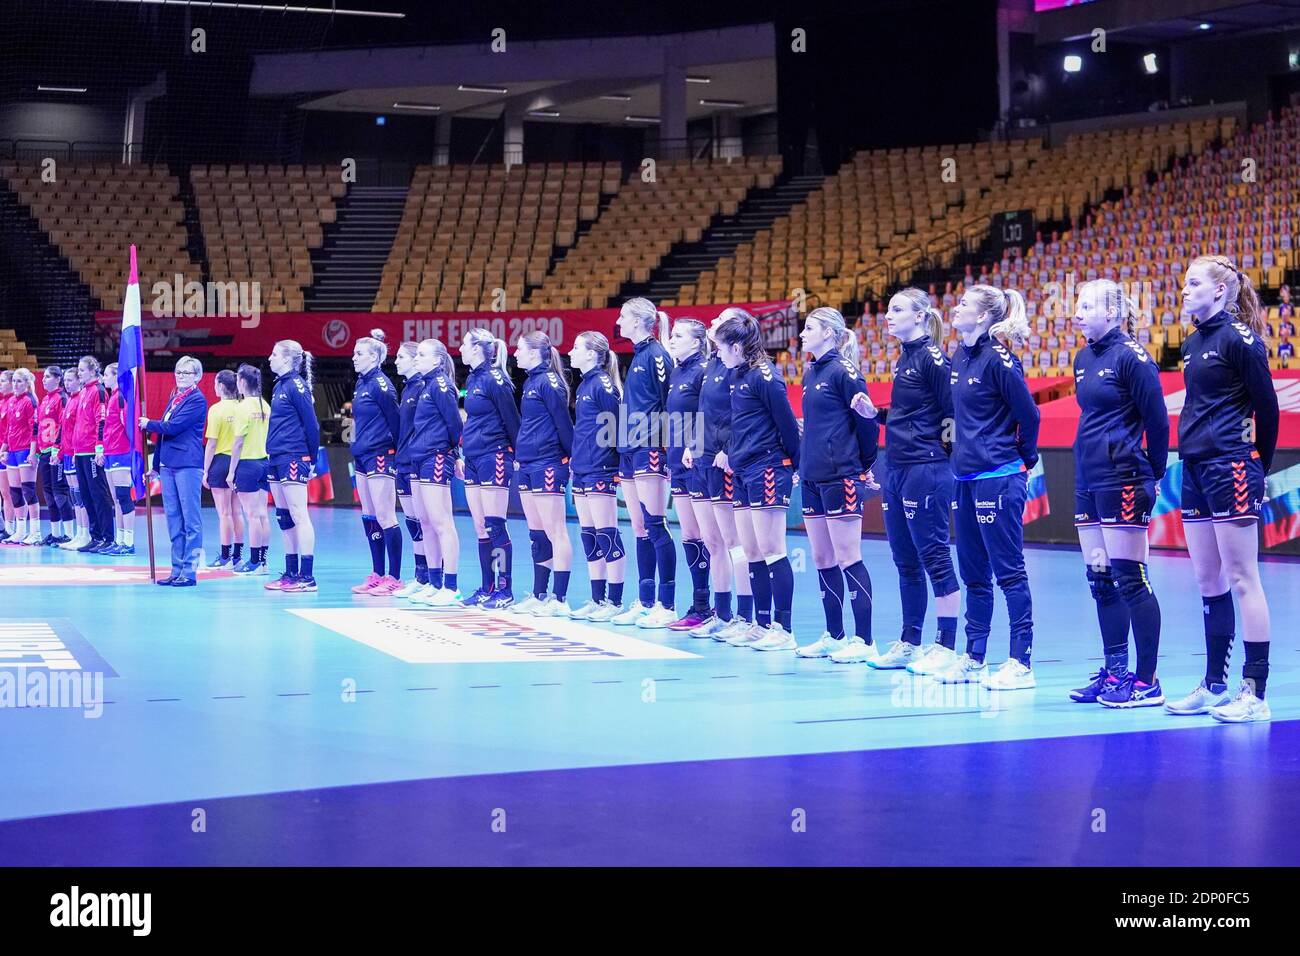 HERNING, DENMARK - DECEMBER 18: Team of The Netherlands during the Women's EHF Euro 2020 match between Russia and The Netherlands at Jyske Bank Boxen Stock Photo